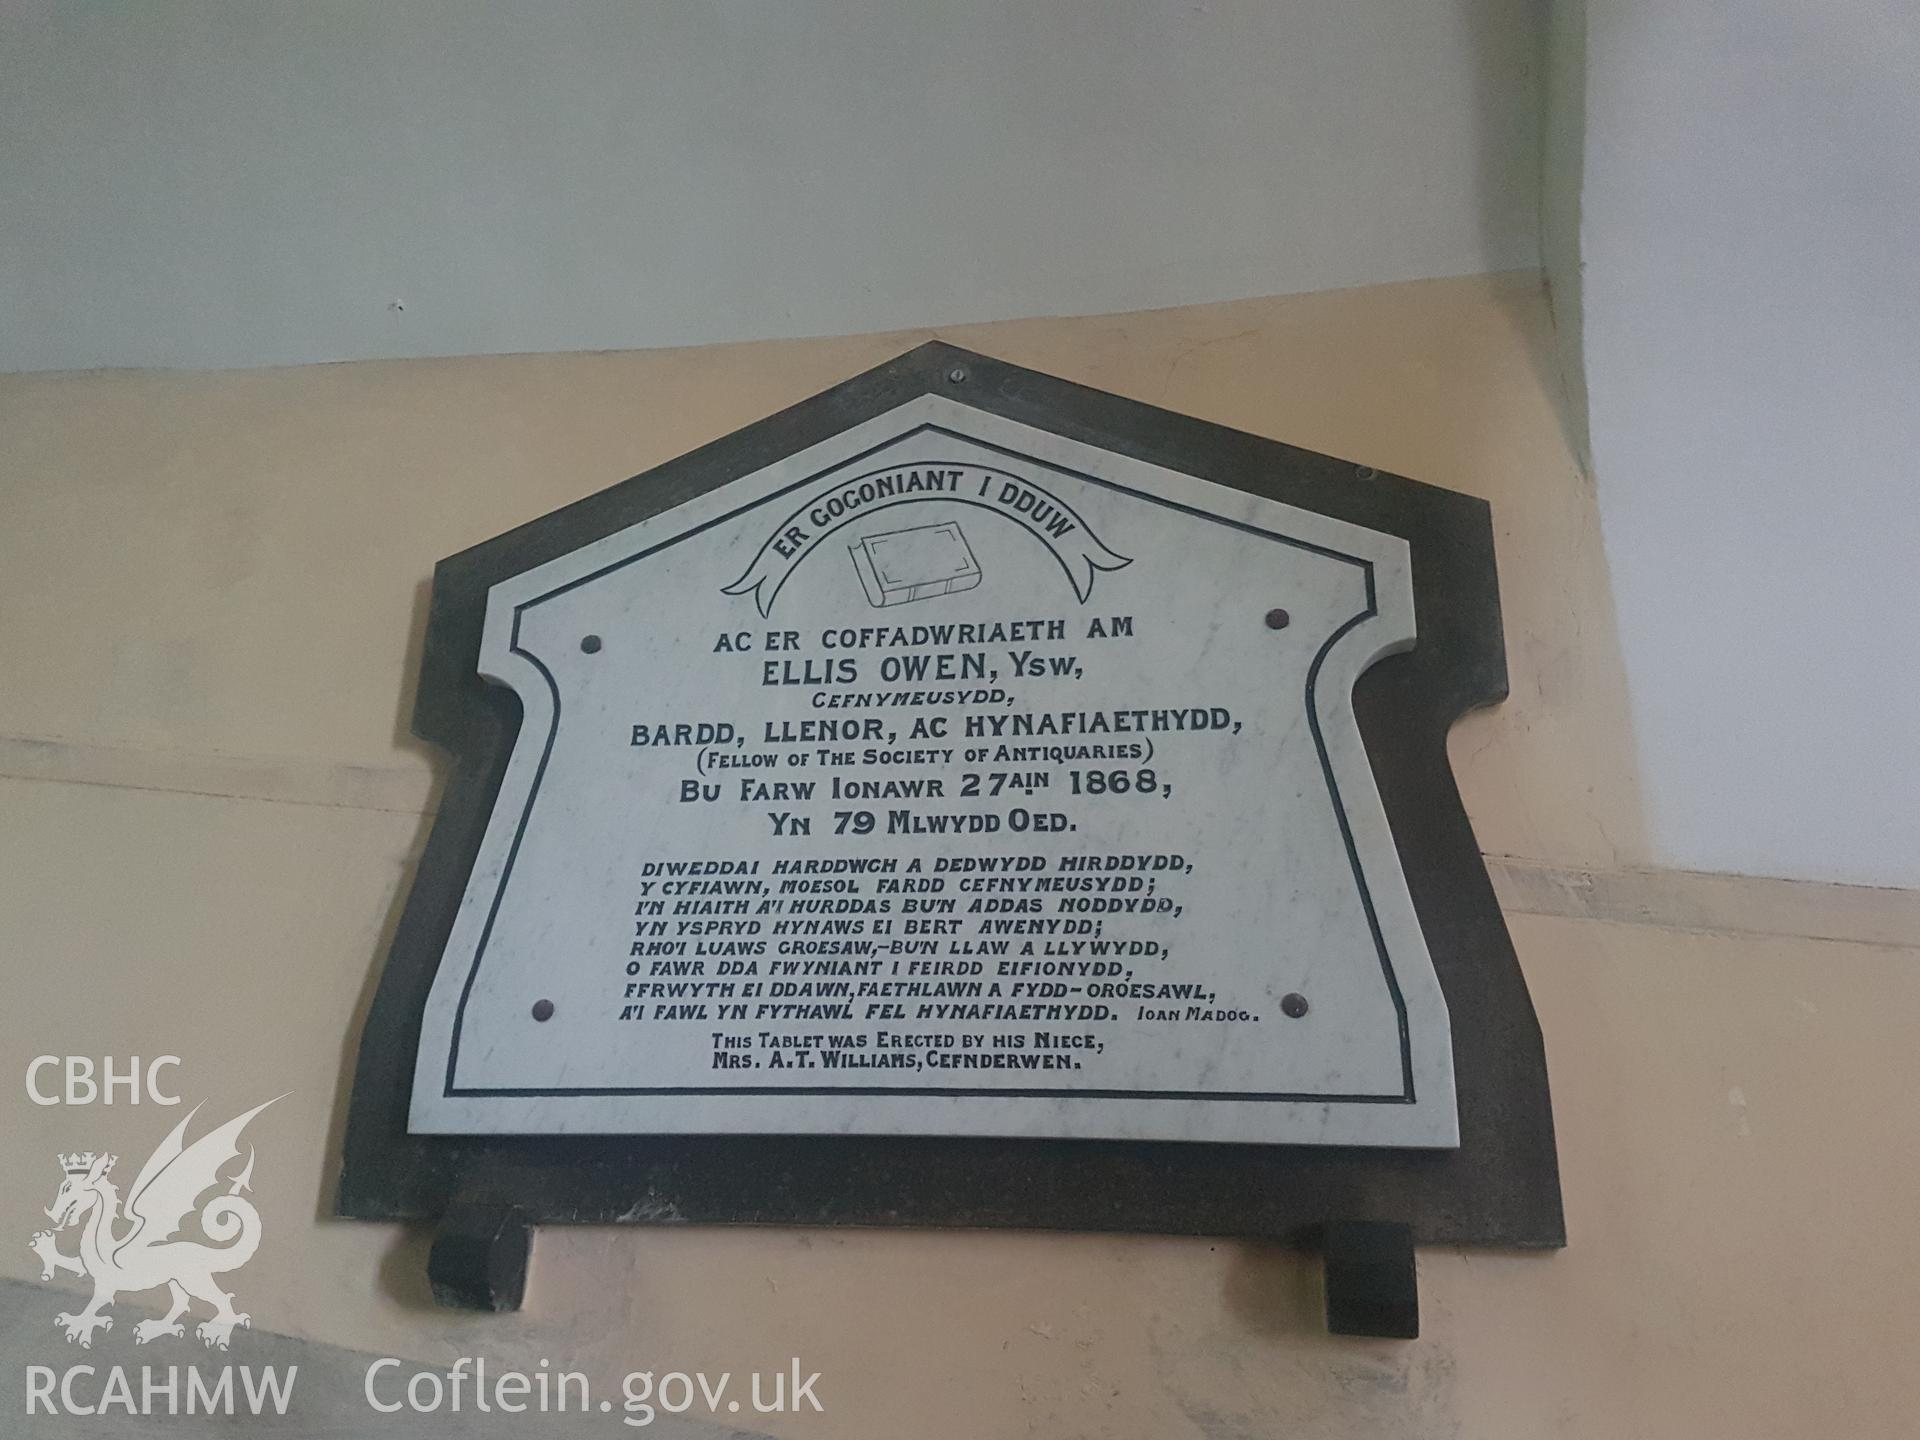 Memorial to Ellis Owen, bard, St Cynhaiarn church. Photographed by Helen Rowe of RCAHMW on 10th October 2020.